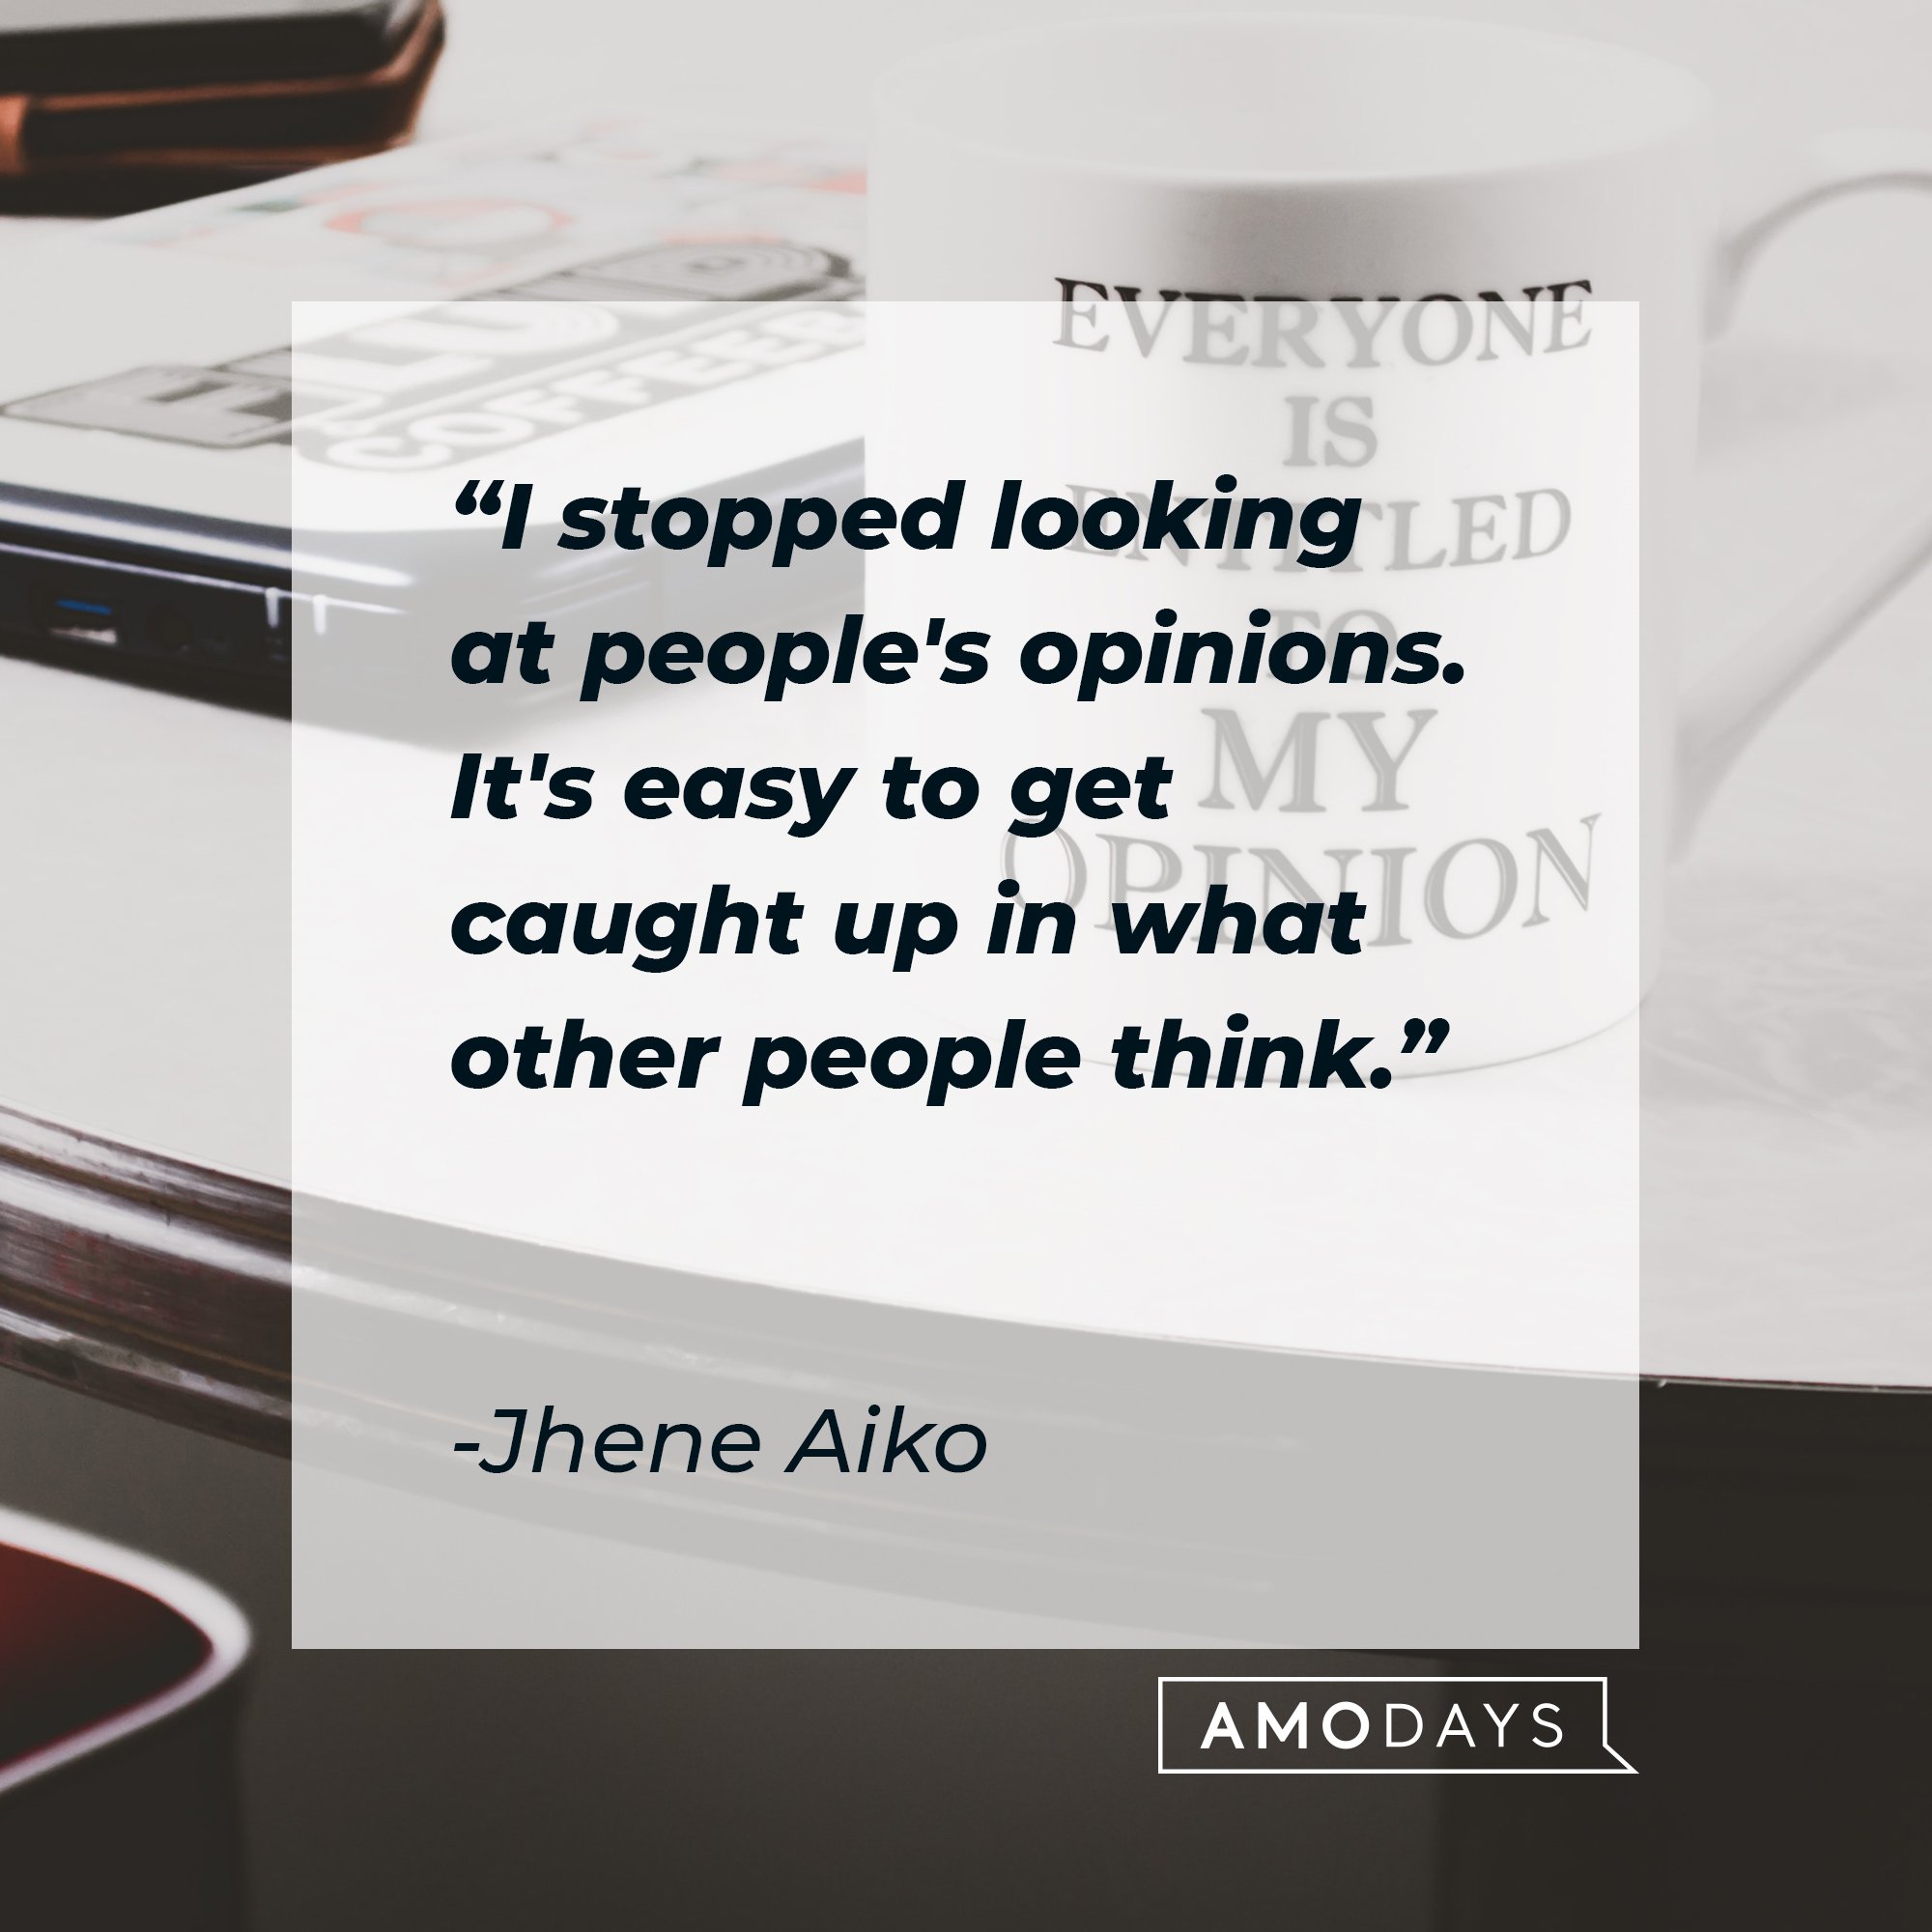  Jhene Aiko‘s quote: "I stopped looking at people's opinions. It's easy to get caught up in what other people think." | Image: AmoDays